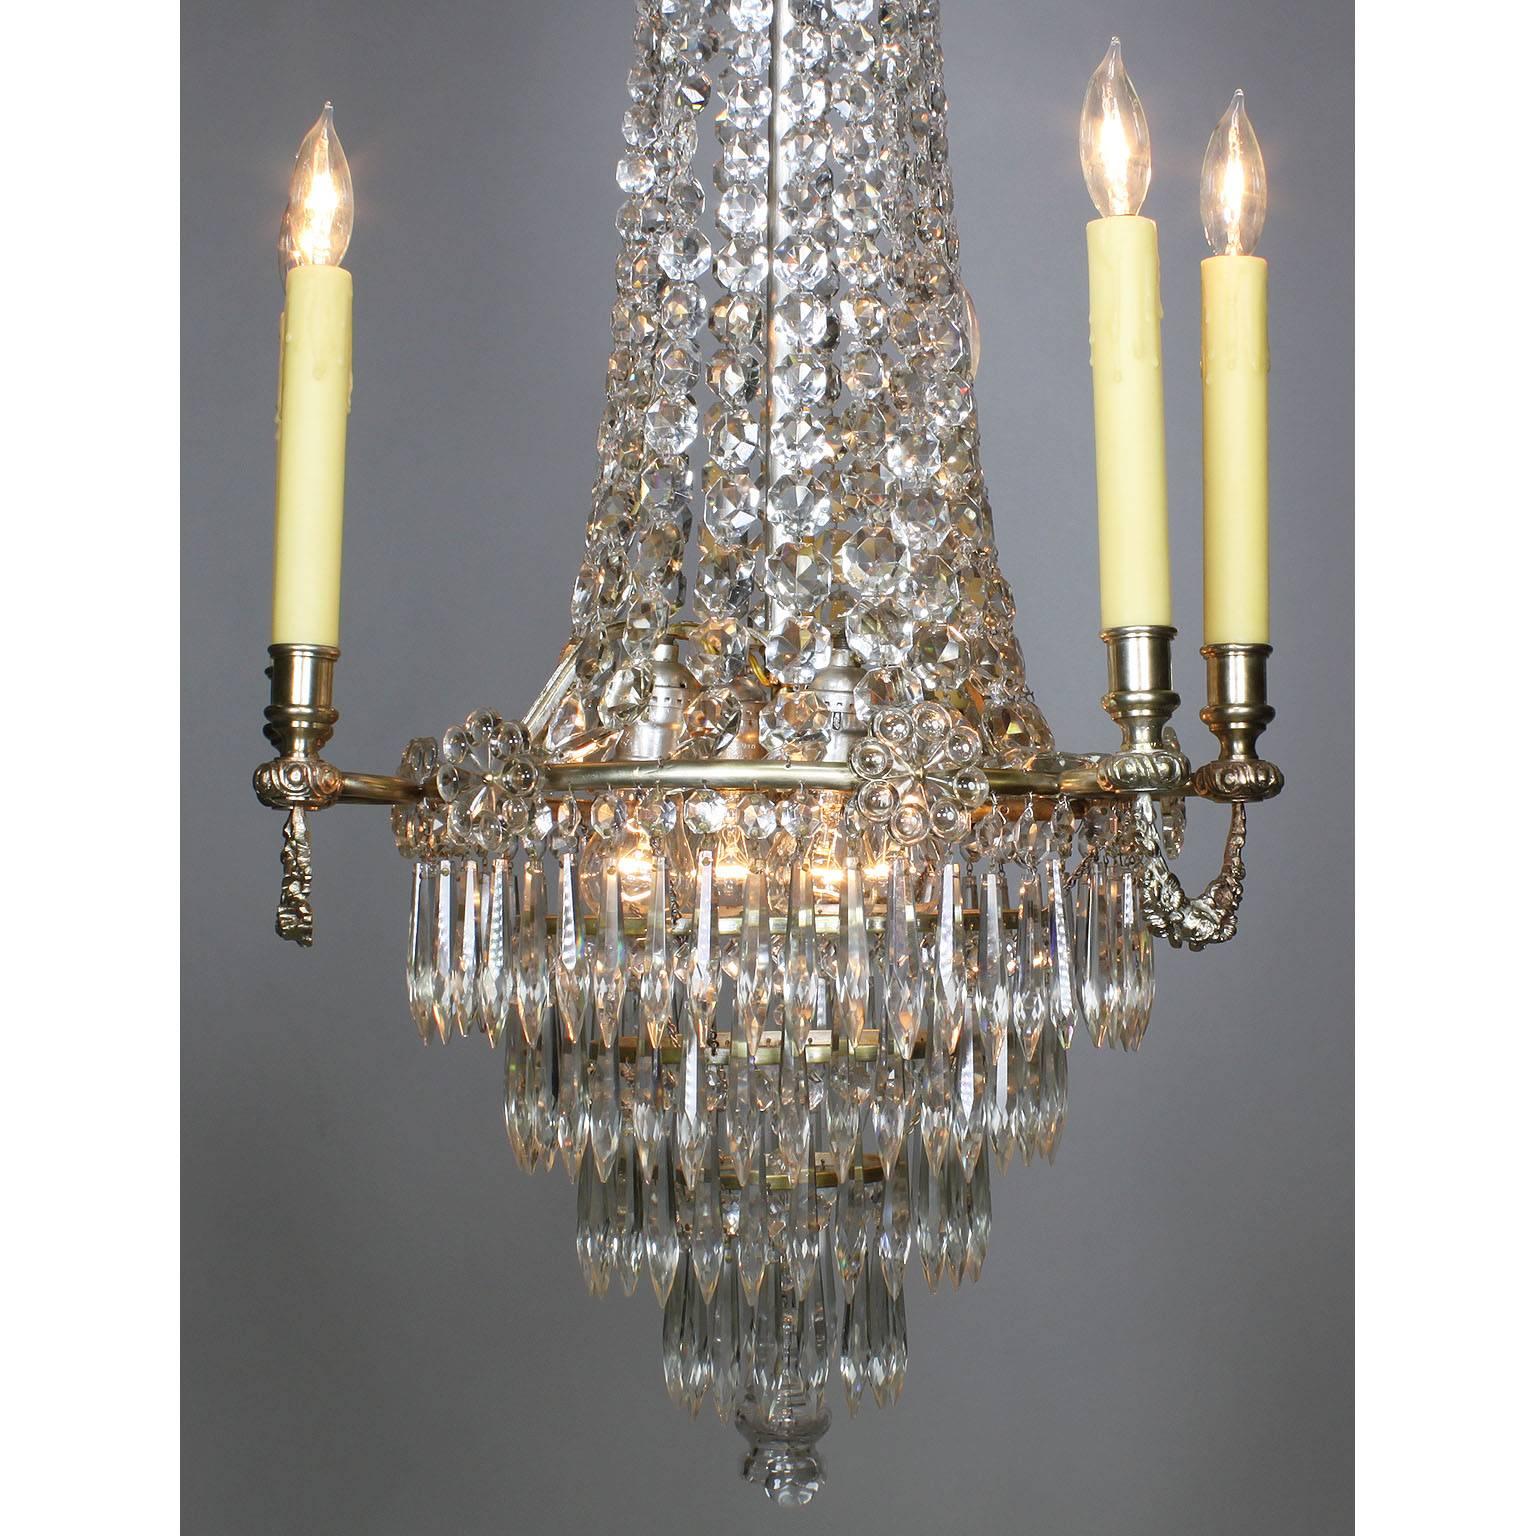 Carved French 19th-20th Century Louis XVI Style Silvered Bronze & Cut-Glass Chandelier For Sale